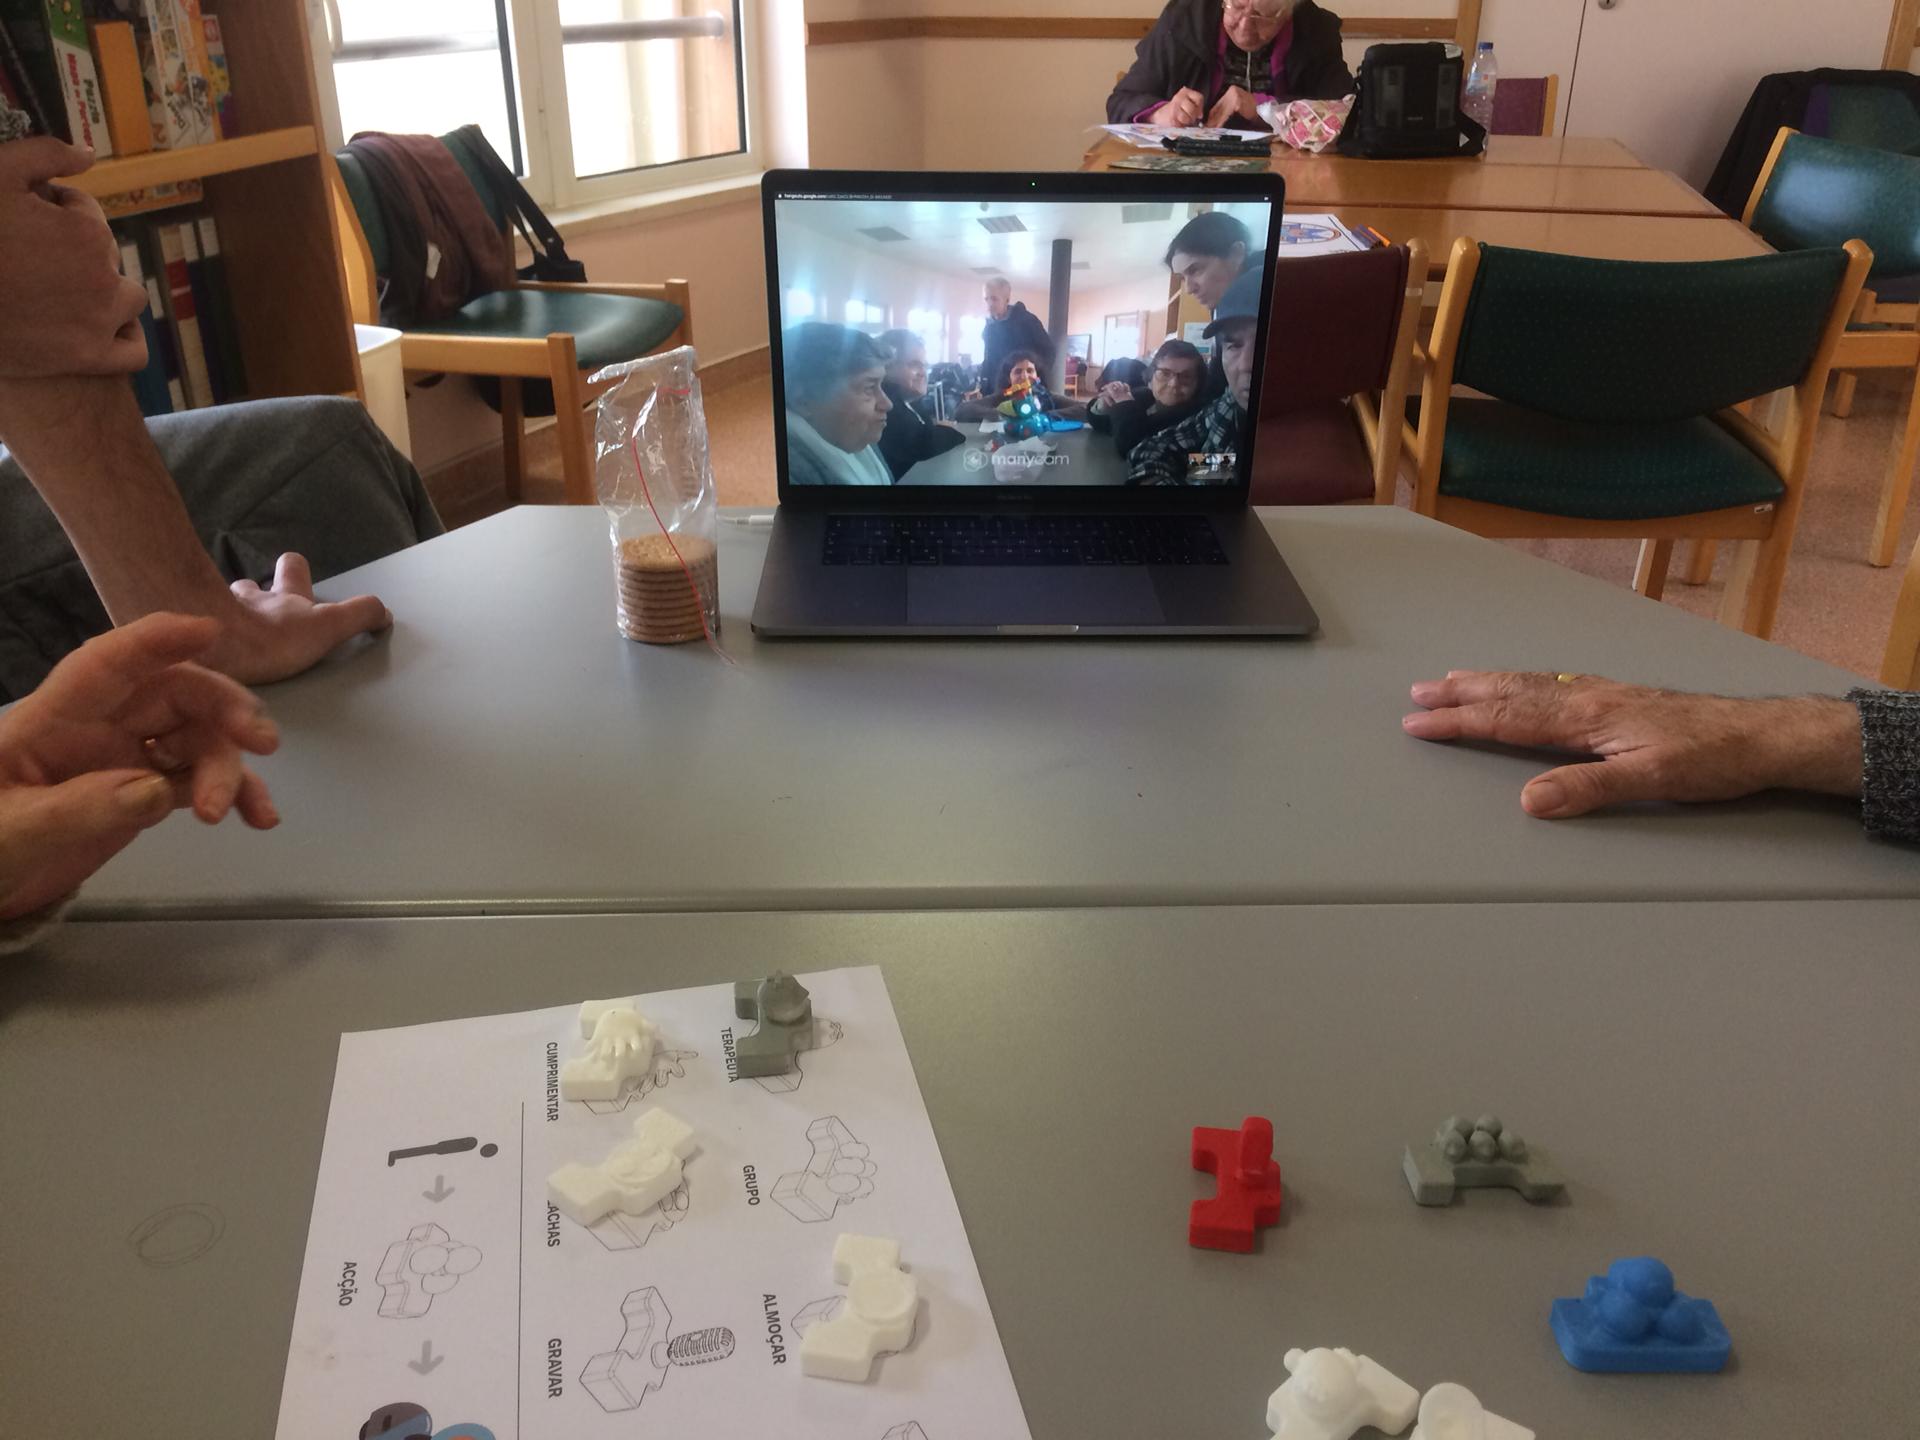 Activity in a care home where a group of older adults is working on a table and watching the other group through a video call